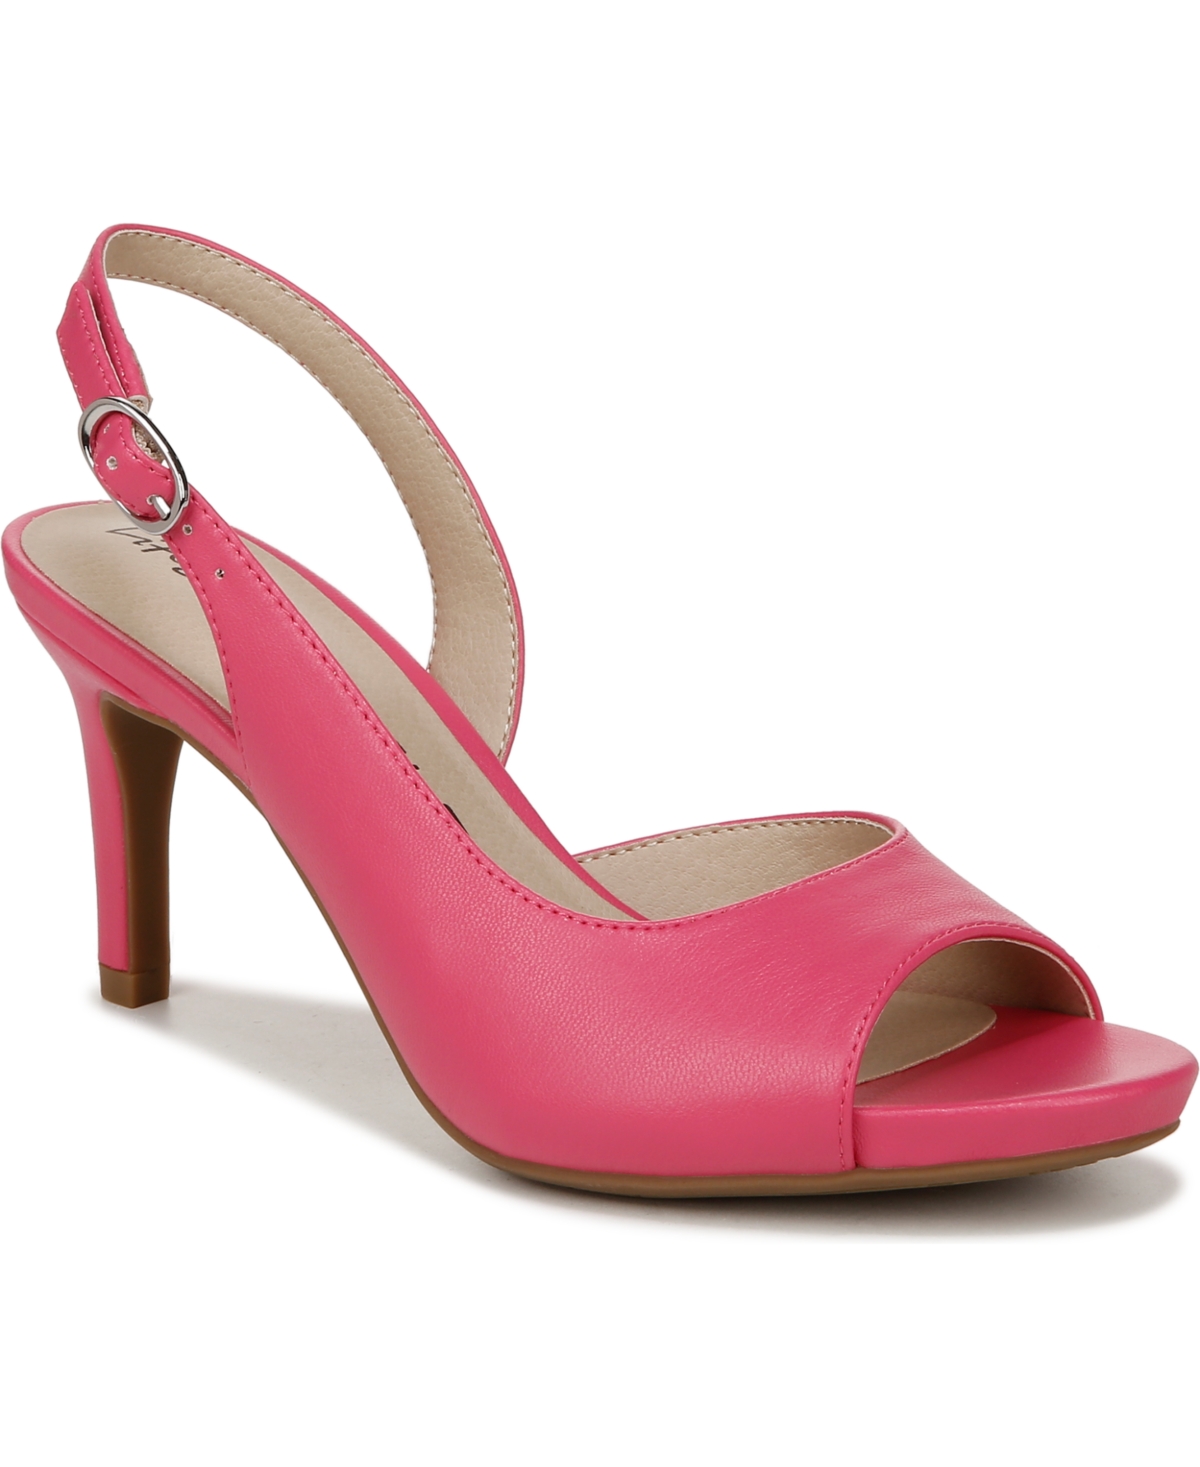 Teller 2 Slingbacks - French Pink Faux Leather